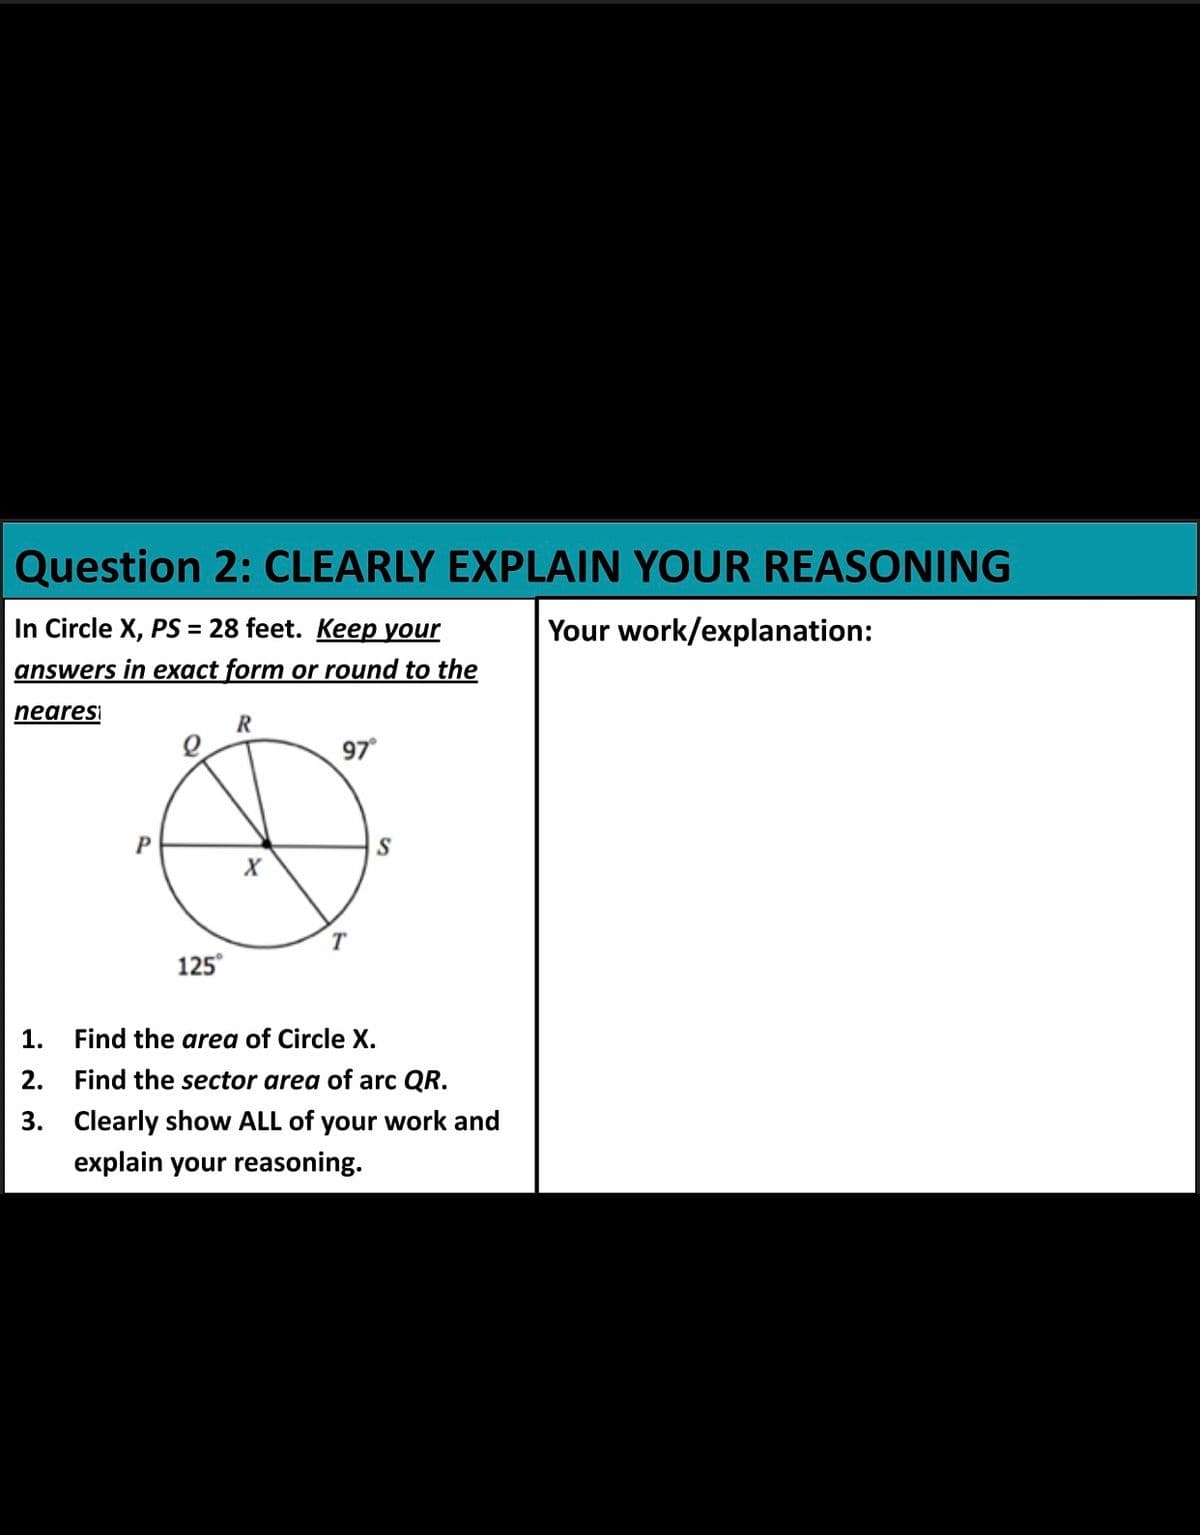 Question 2: CLEARLY EXPLAIN YOUR REASONING
In Circle X, PS = 28 feet. Keep your
Your work/explanation:
answers in exact form or round to the
nearesi
97
S
T
125°
1. Find the area of Circle X.
2.
Find the sector area of arc QR.
3. Clearly show ALL of your work and
explain your reasoning.
